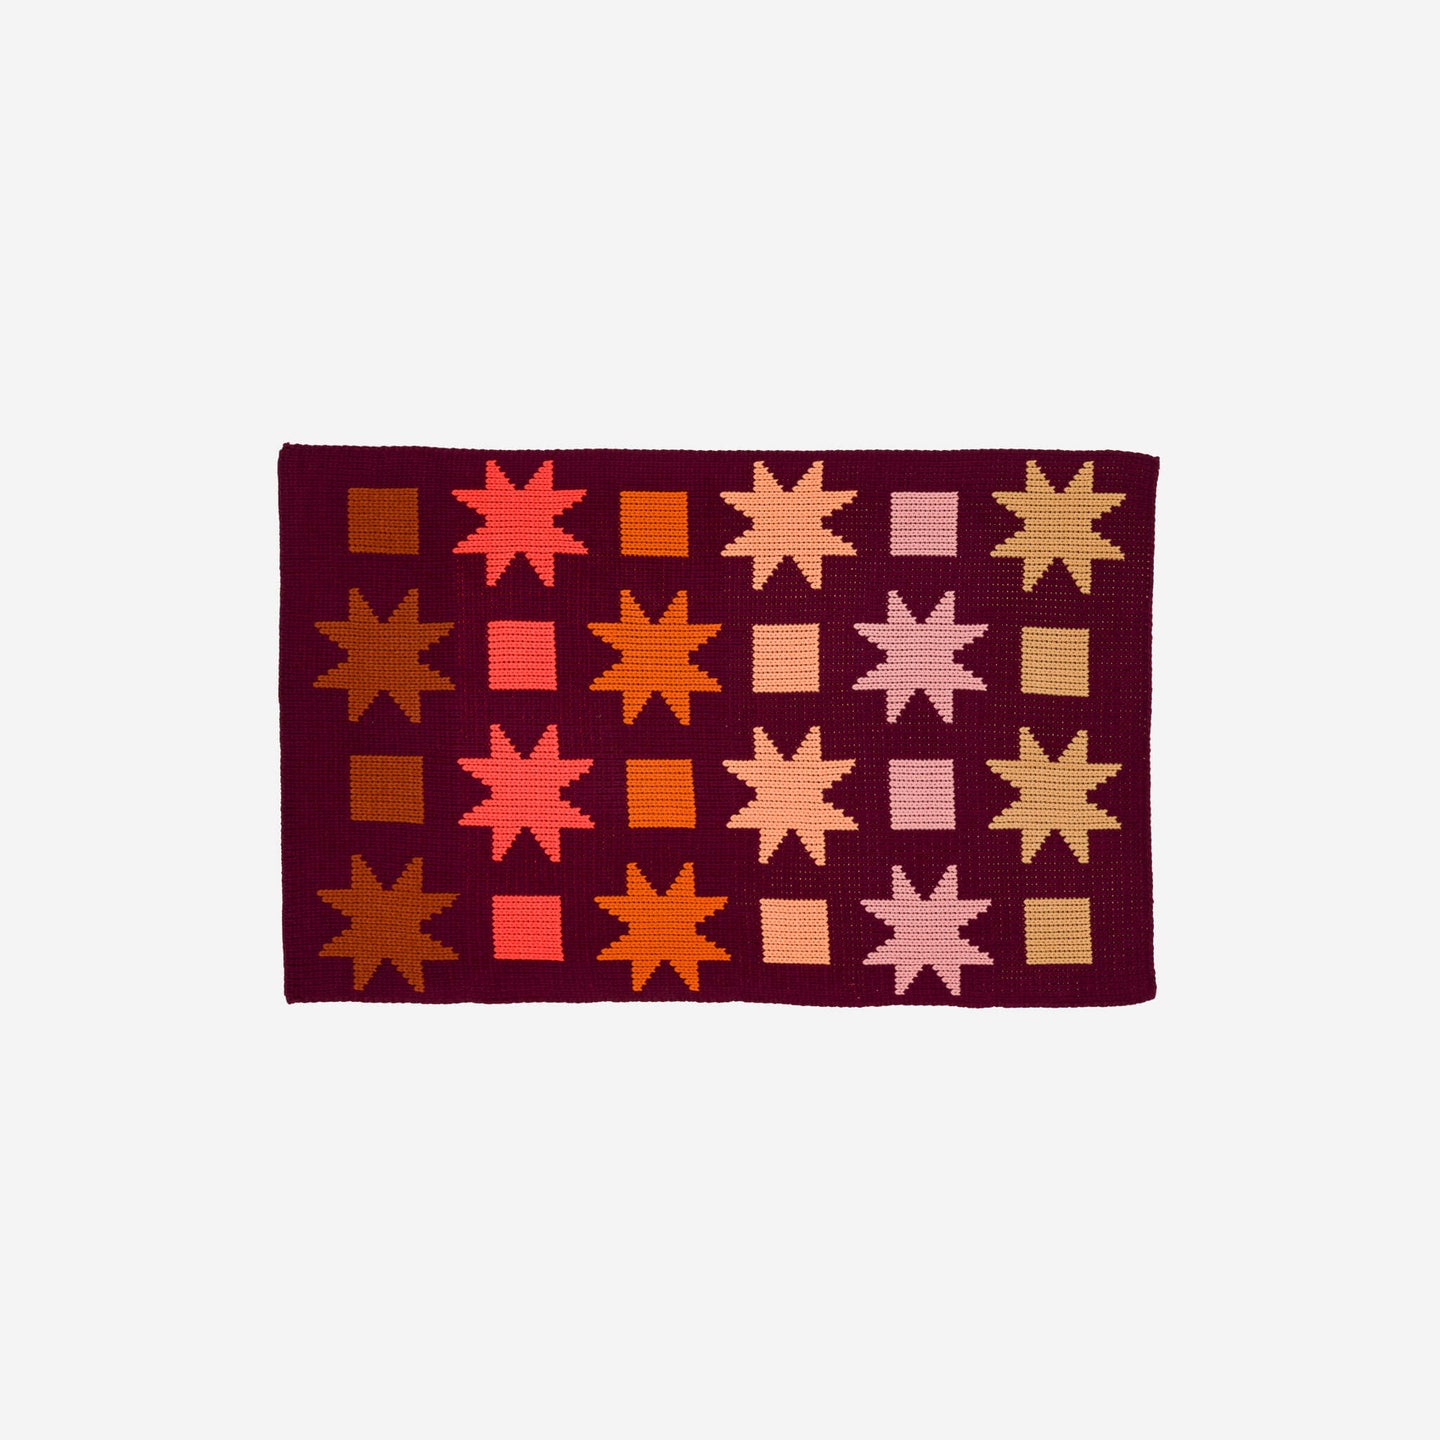 Quilt Star Graphic Geometric Mini Knit Rug with Non Slip Pad